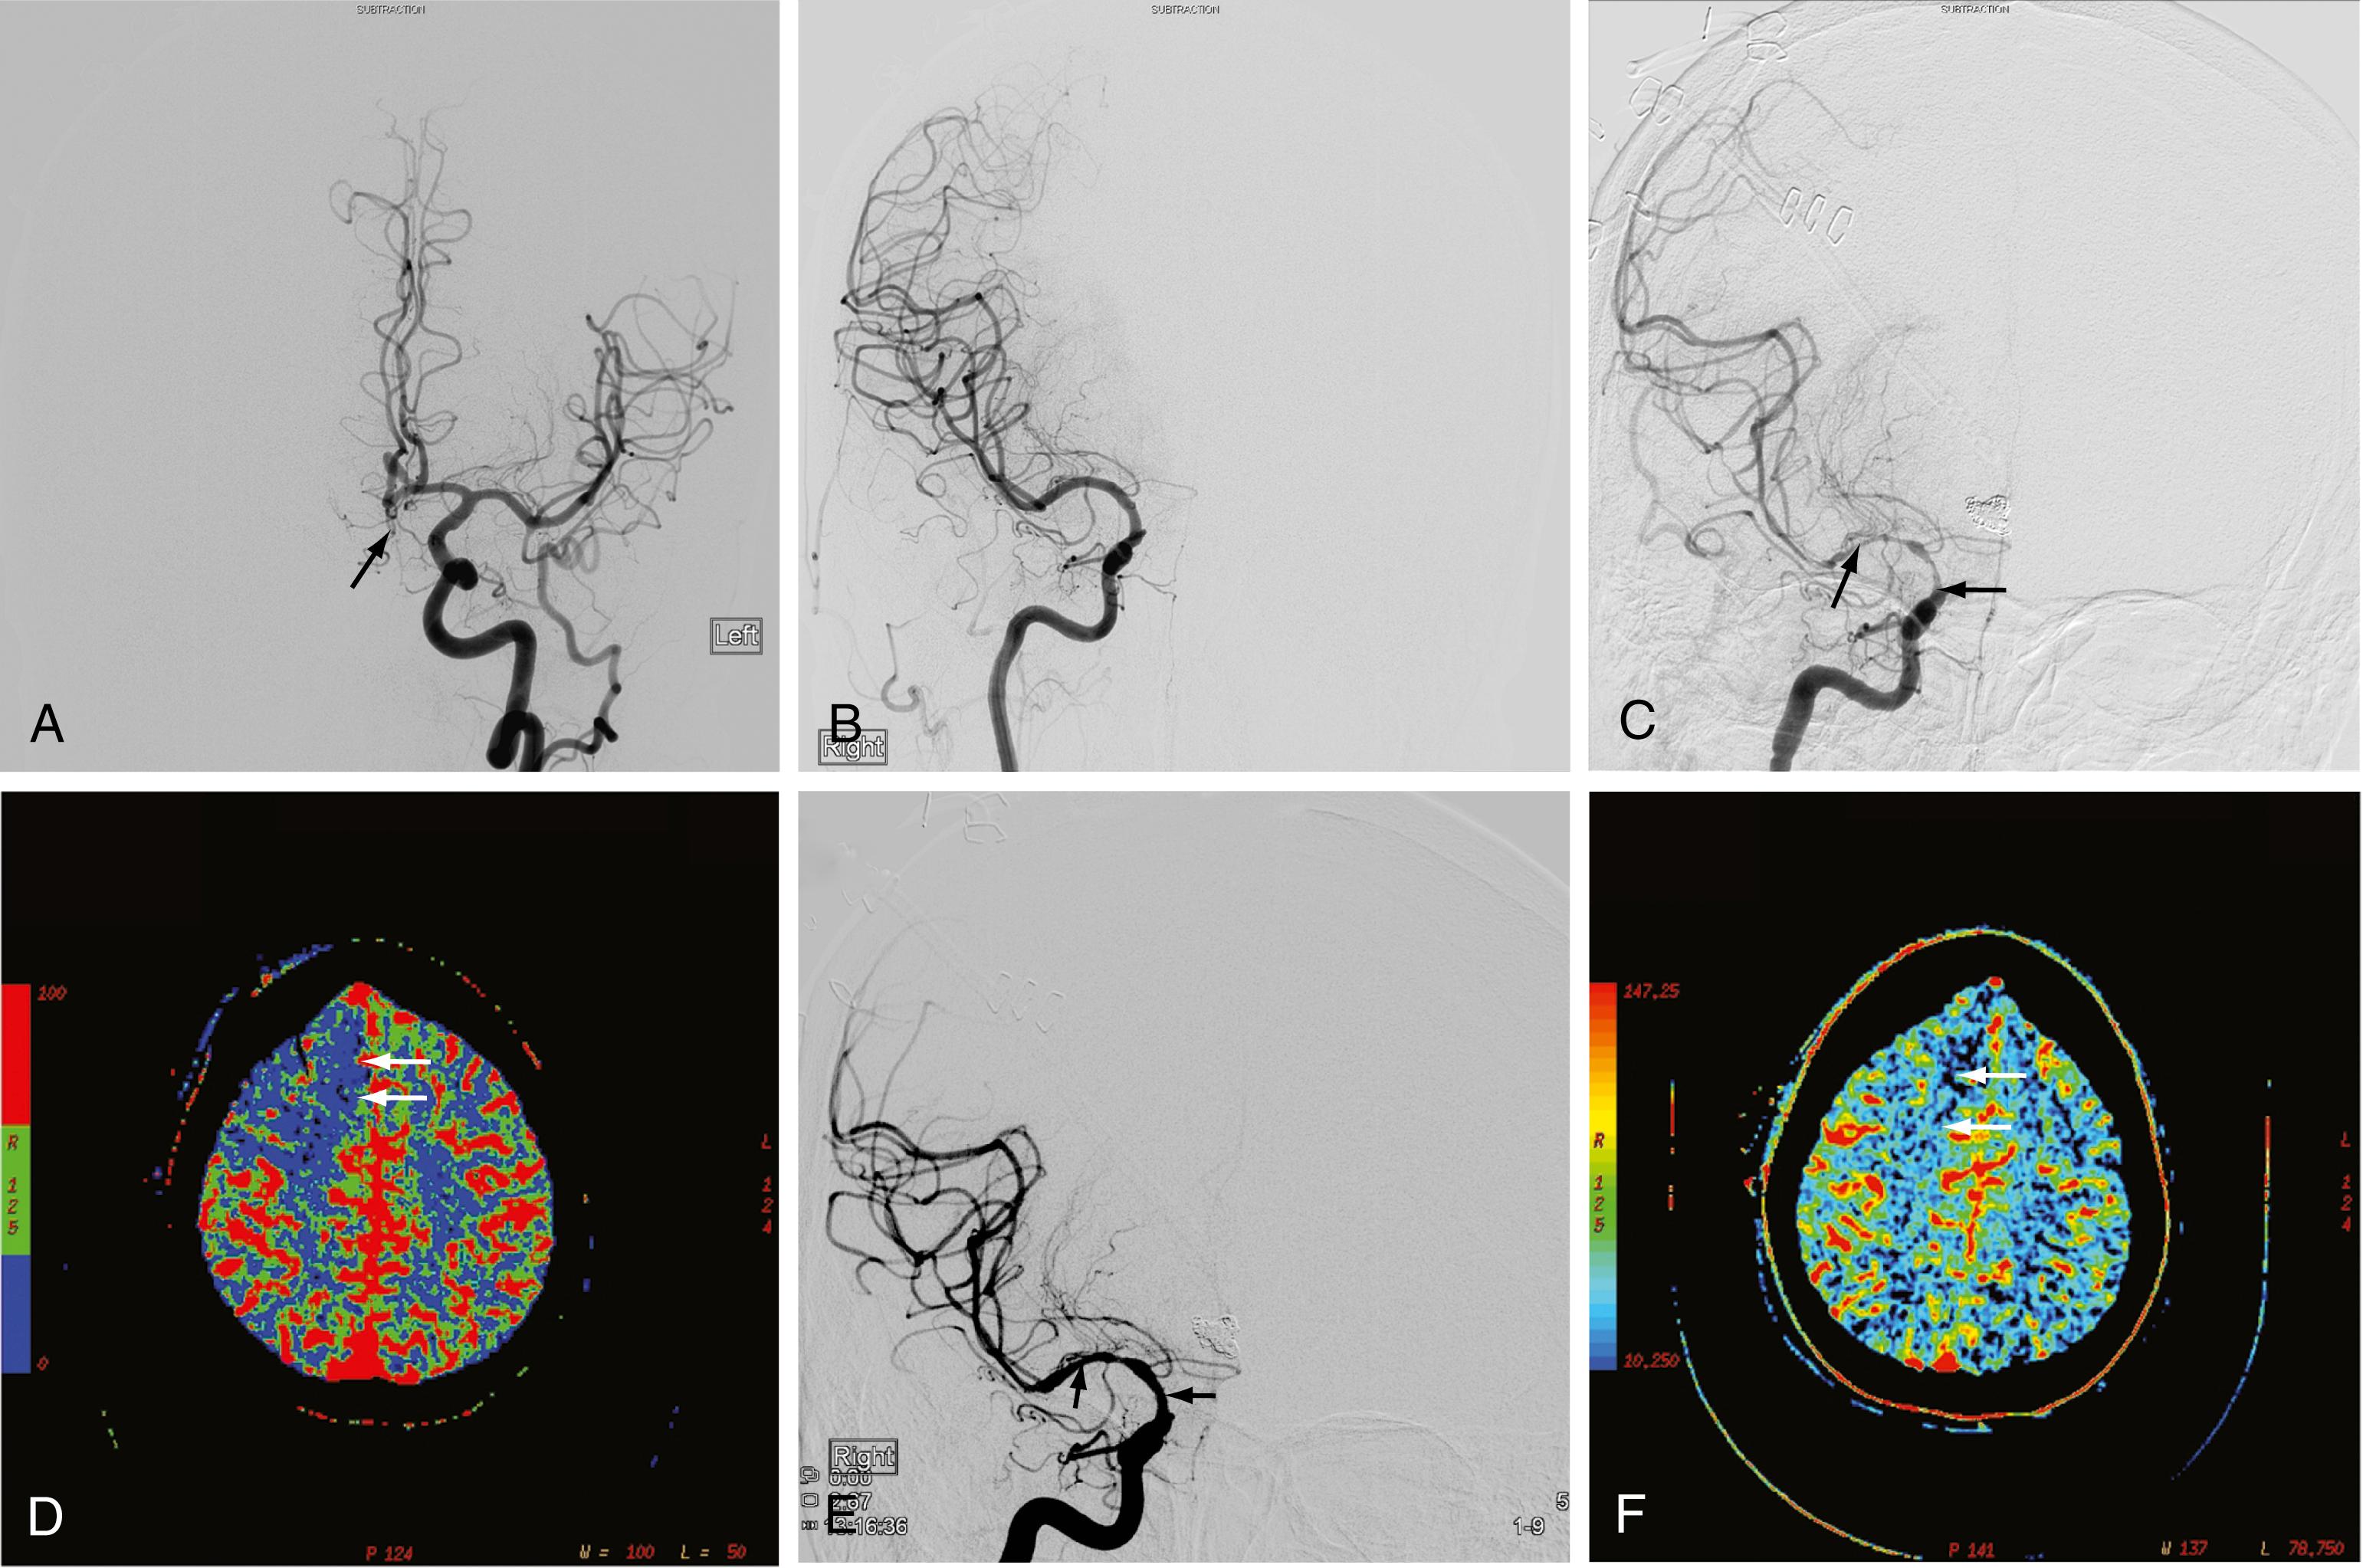 Figure 10.8, (A) Anteroposterior angiogram of the left internal carotid artery (ICA), demonstrating a ruptured aneurysm in the anterior communicating artery (arrow). (B) Anteroposterior angiogram of the right ICA, illustrating absence of the A1 segment of the right anterior cerebral artery and no vasospasm. (C) Anteroposterior angiogram of the right ICA 7 days after admission, showing severe vasospasm of the M1 segment of the right middle cerebral artery (MCA; upward-pointing arrow ) and supraclinoid right ICA (left-pointing arrow). (D) Perfusion computed tomographic map of cerebral blood flow (CBF), demonstrating vasospasm-induced decreased CBF ( blue areas) within the right frontal lobe (arrows). (E) Anteroposterior angiogram of the right ICA after intra-arterial administration of verapamil, showing improved vessel caliber of the MCA (upward-pointing arrow) and ICA (left-pointing arrow). (F) Follow-up perfusion computed tomographic image at the same level as in D, illustrating restored CBF in the right anterior frontal lobe on a CBF color map (arrows).